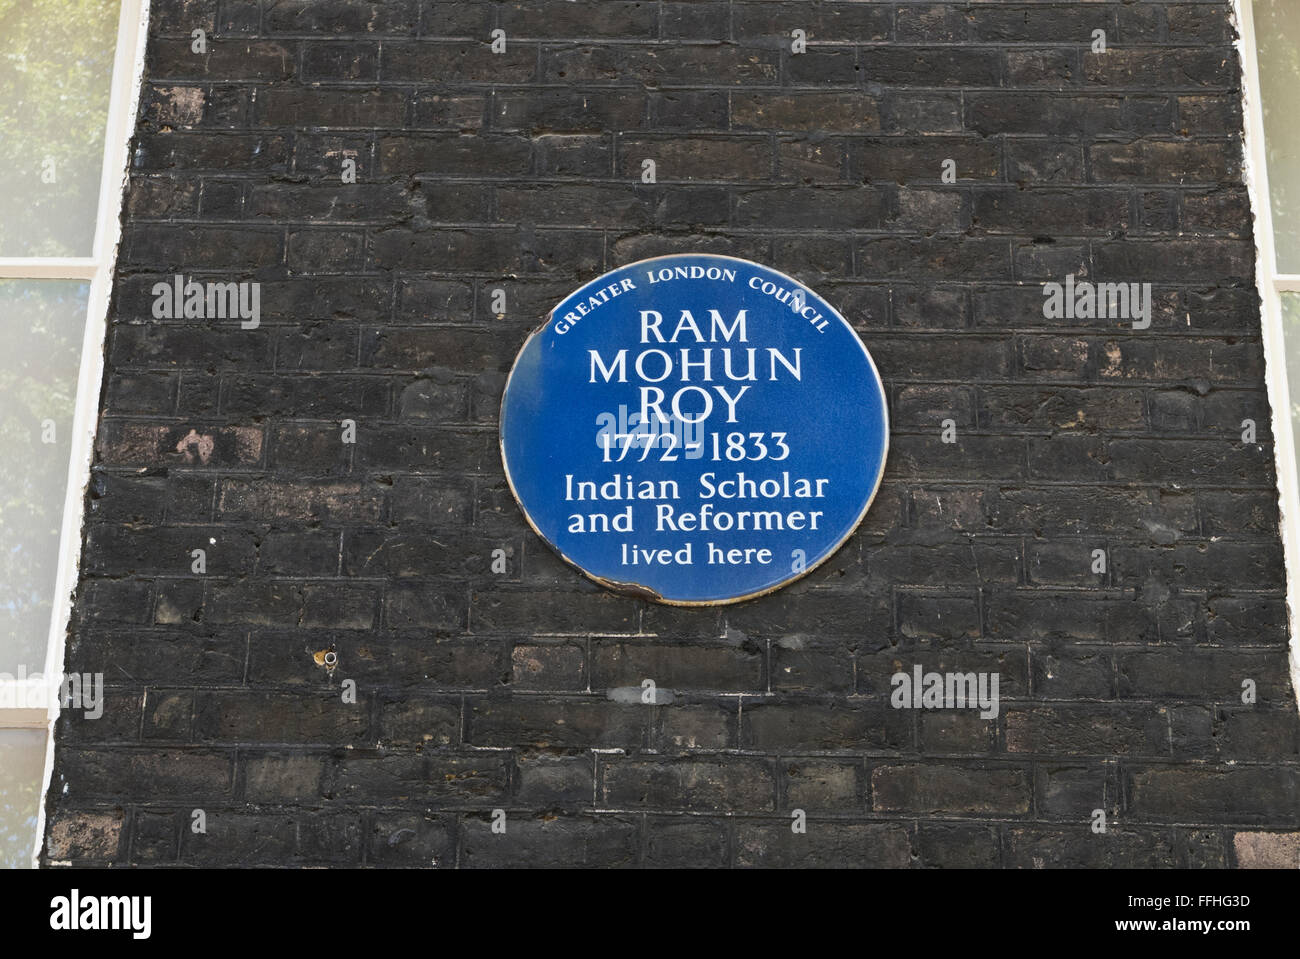 A commemorative blue plaque for Ram Mohun Roy (1772 - 1833) Indian Scholar on display on a wall in London, United Kingdom Stock Photo